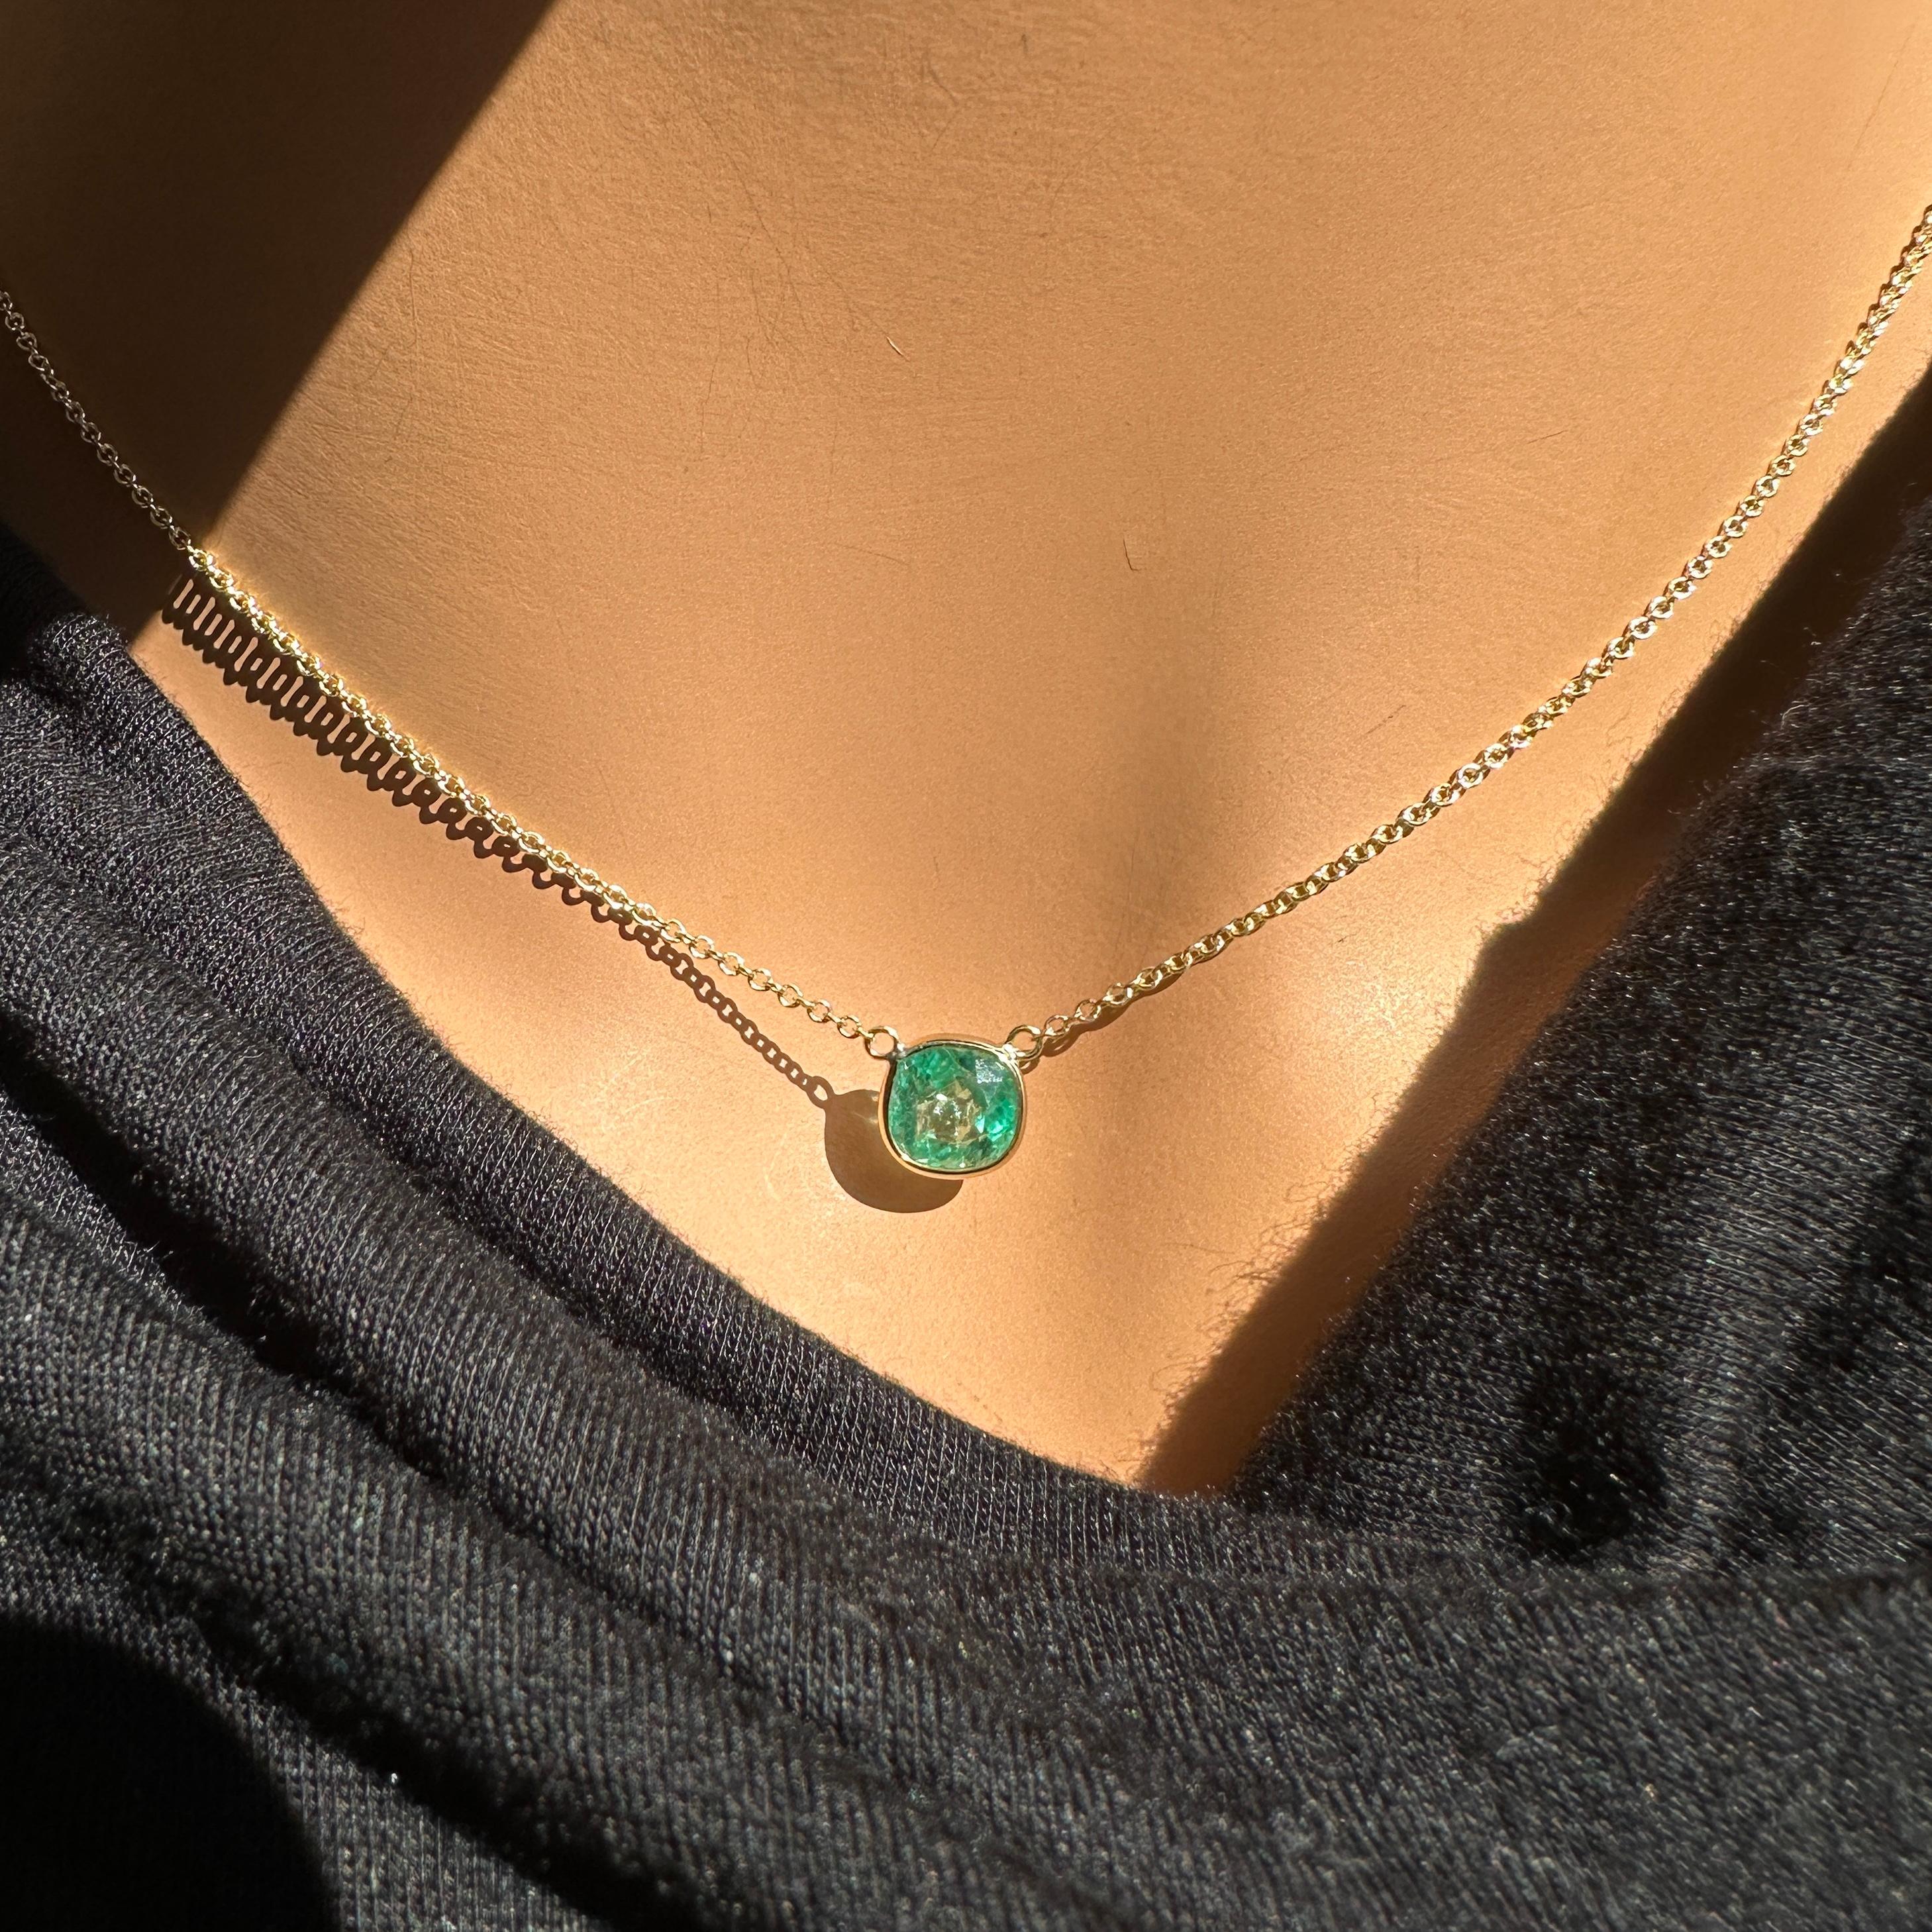 A fashion necklace crafted in 14k yellow gold with a main stone of a cushion-cut emerald weighing 1.51 carats would be a beautiful and stylish choice. Emeralds are known for their lush green color and timeless appeal, and the cushion cut adds a